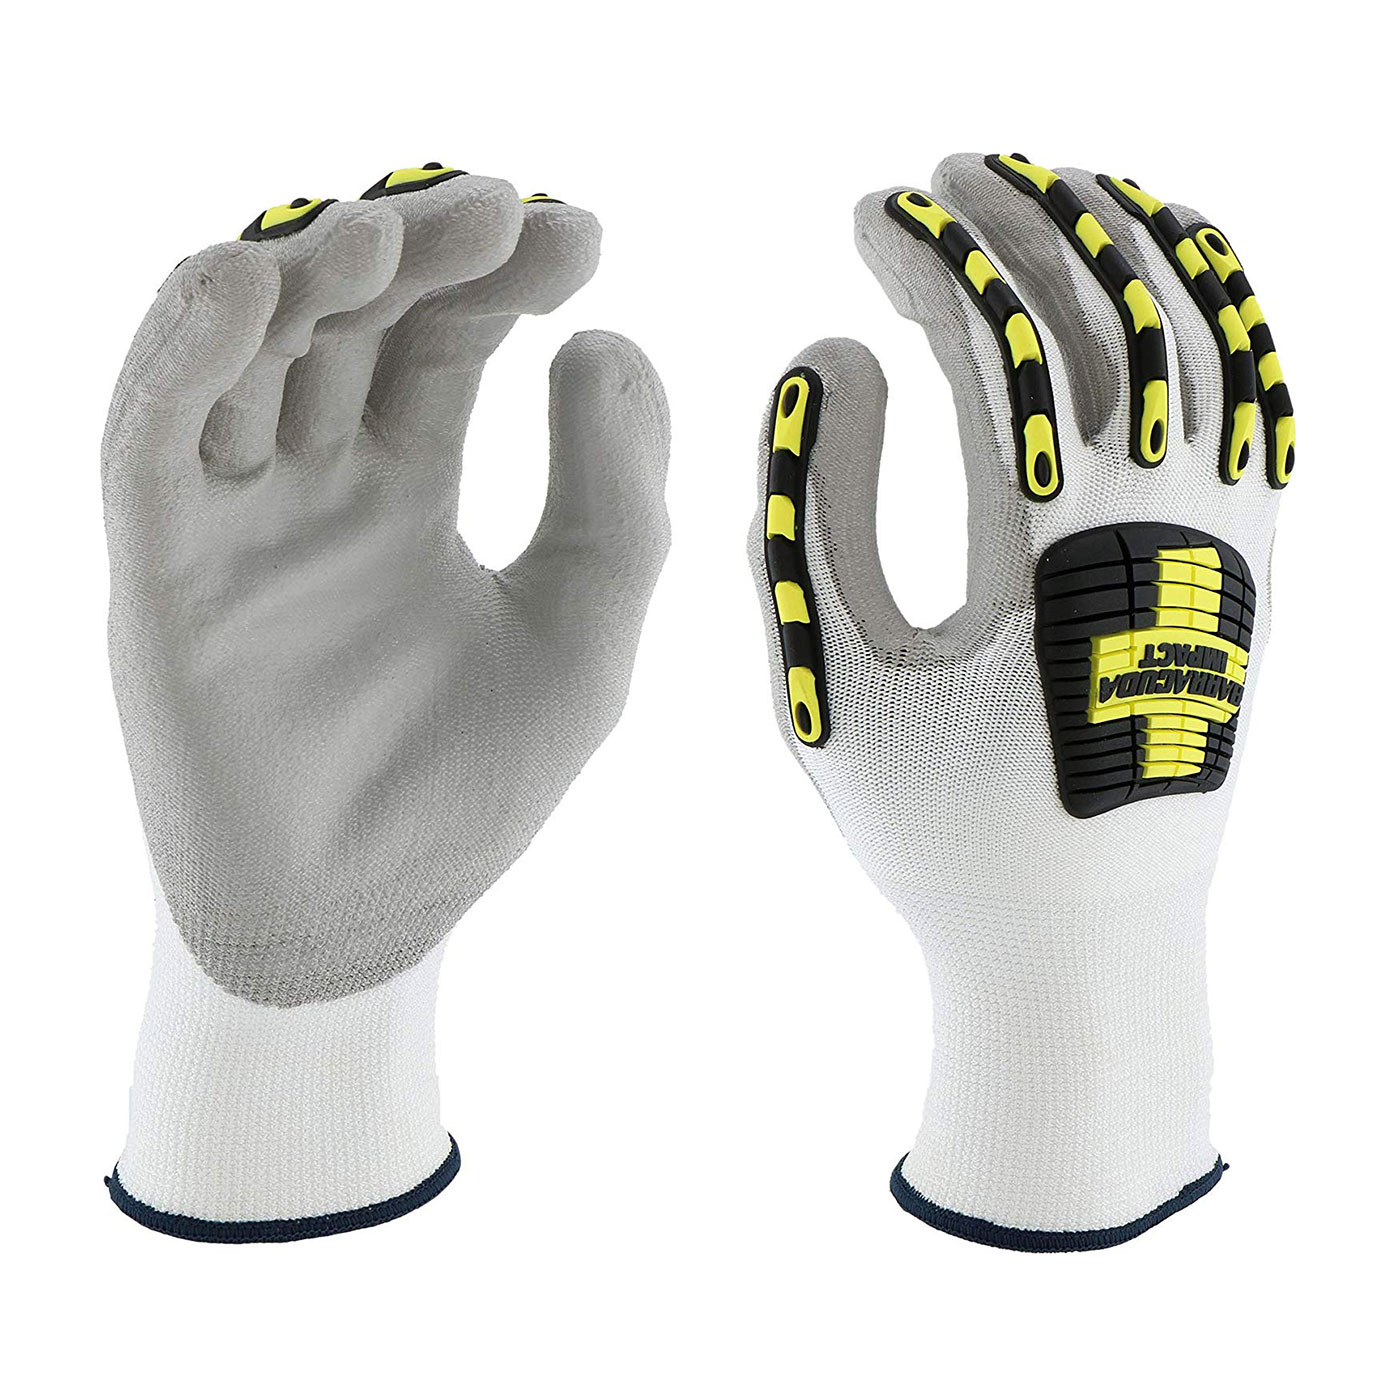 #713HGWUB PIP® Barracuda Seamless Knit Glove with Impact Protection and PU Coated Palm Grip